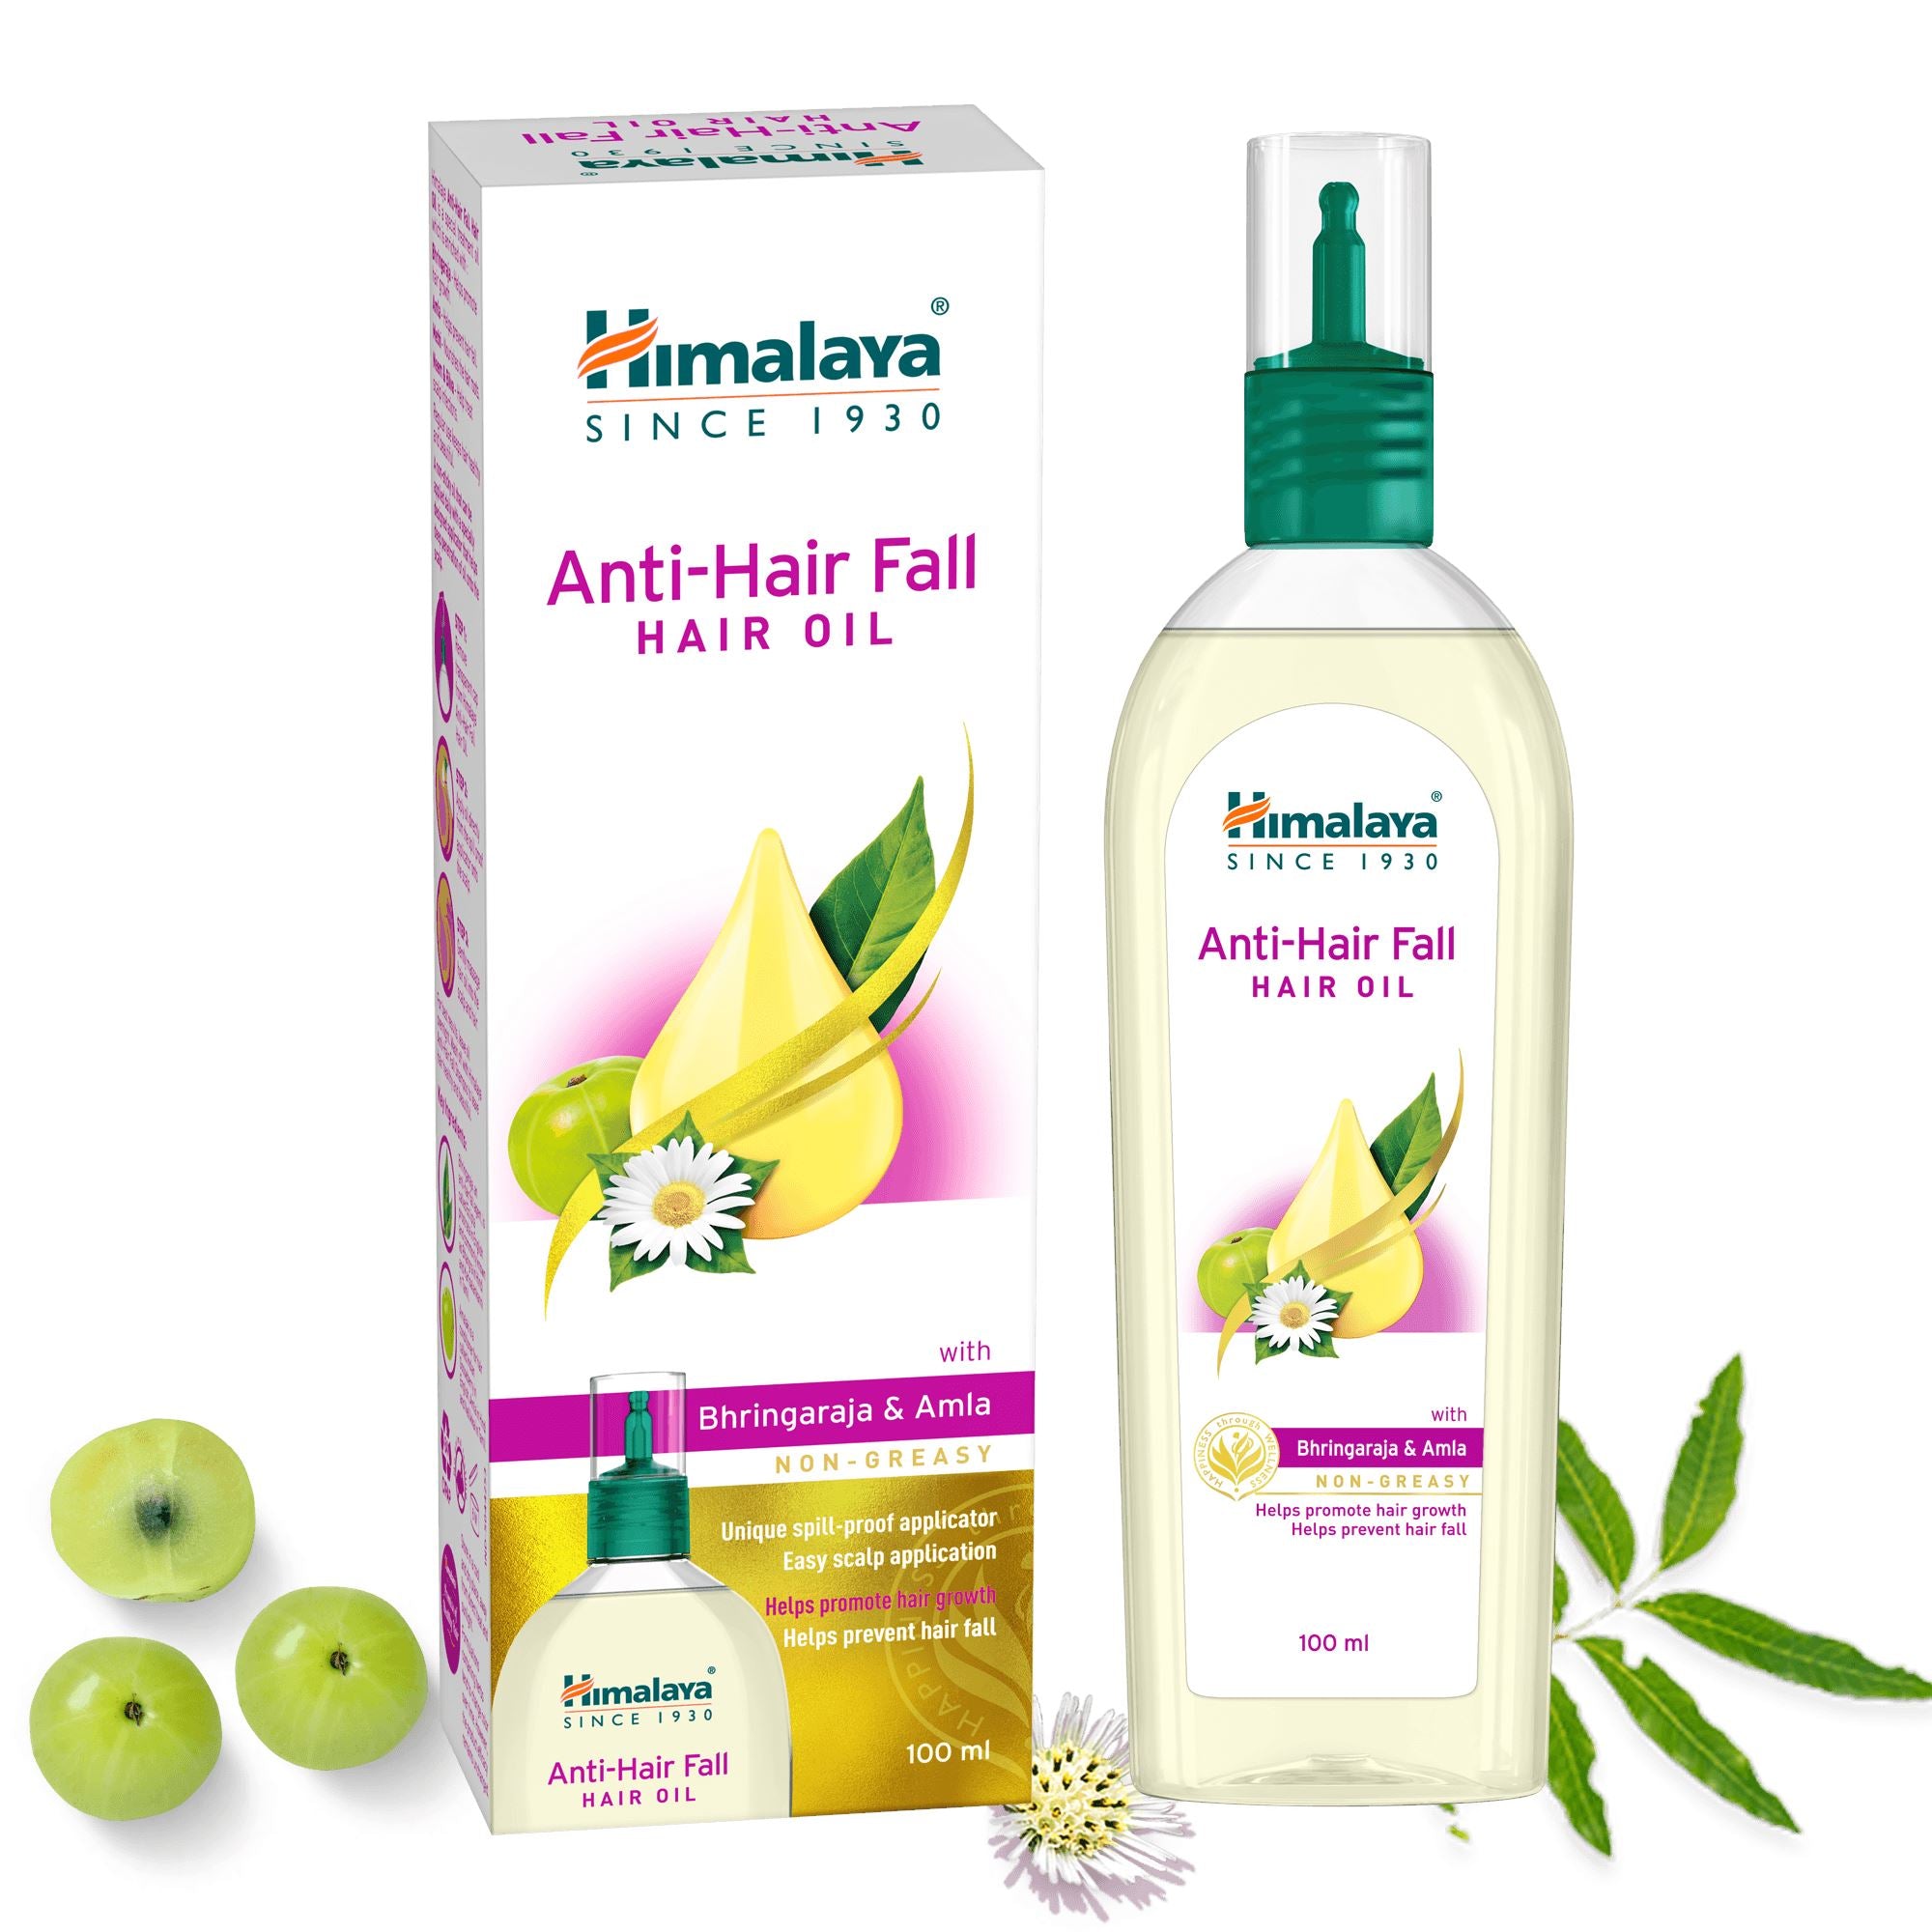 Himalaya Hair Care Official on Twitter Himalaya Protein Hair Creams  natural goodness nourishes your hair helps strengthen it and leaves it  soft and shiny HealthyHairKaVaada httpstcoVGFPtb4Xsr  Twitter